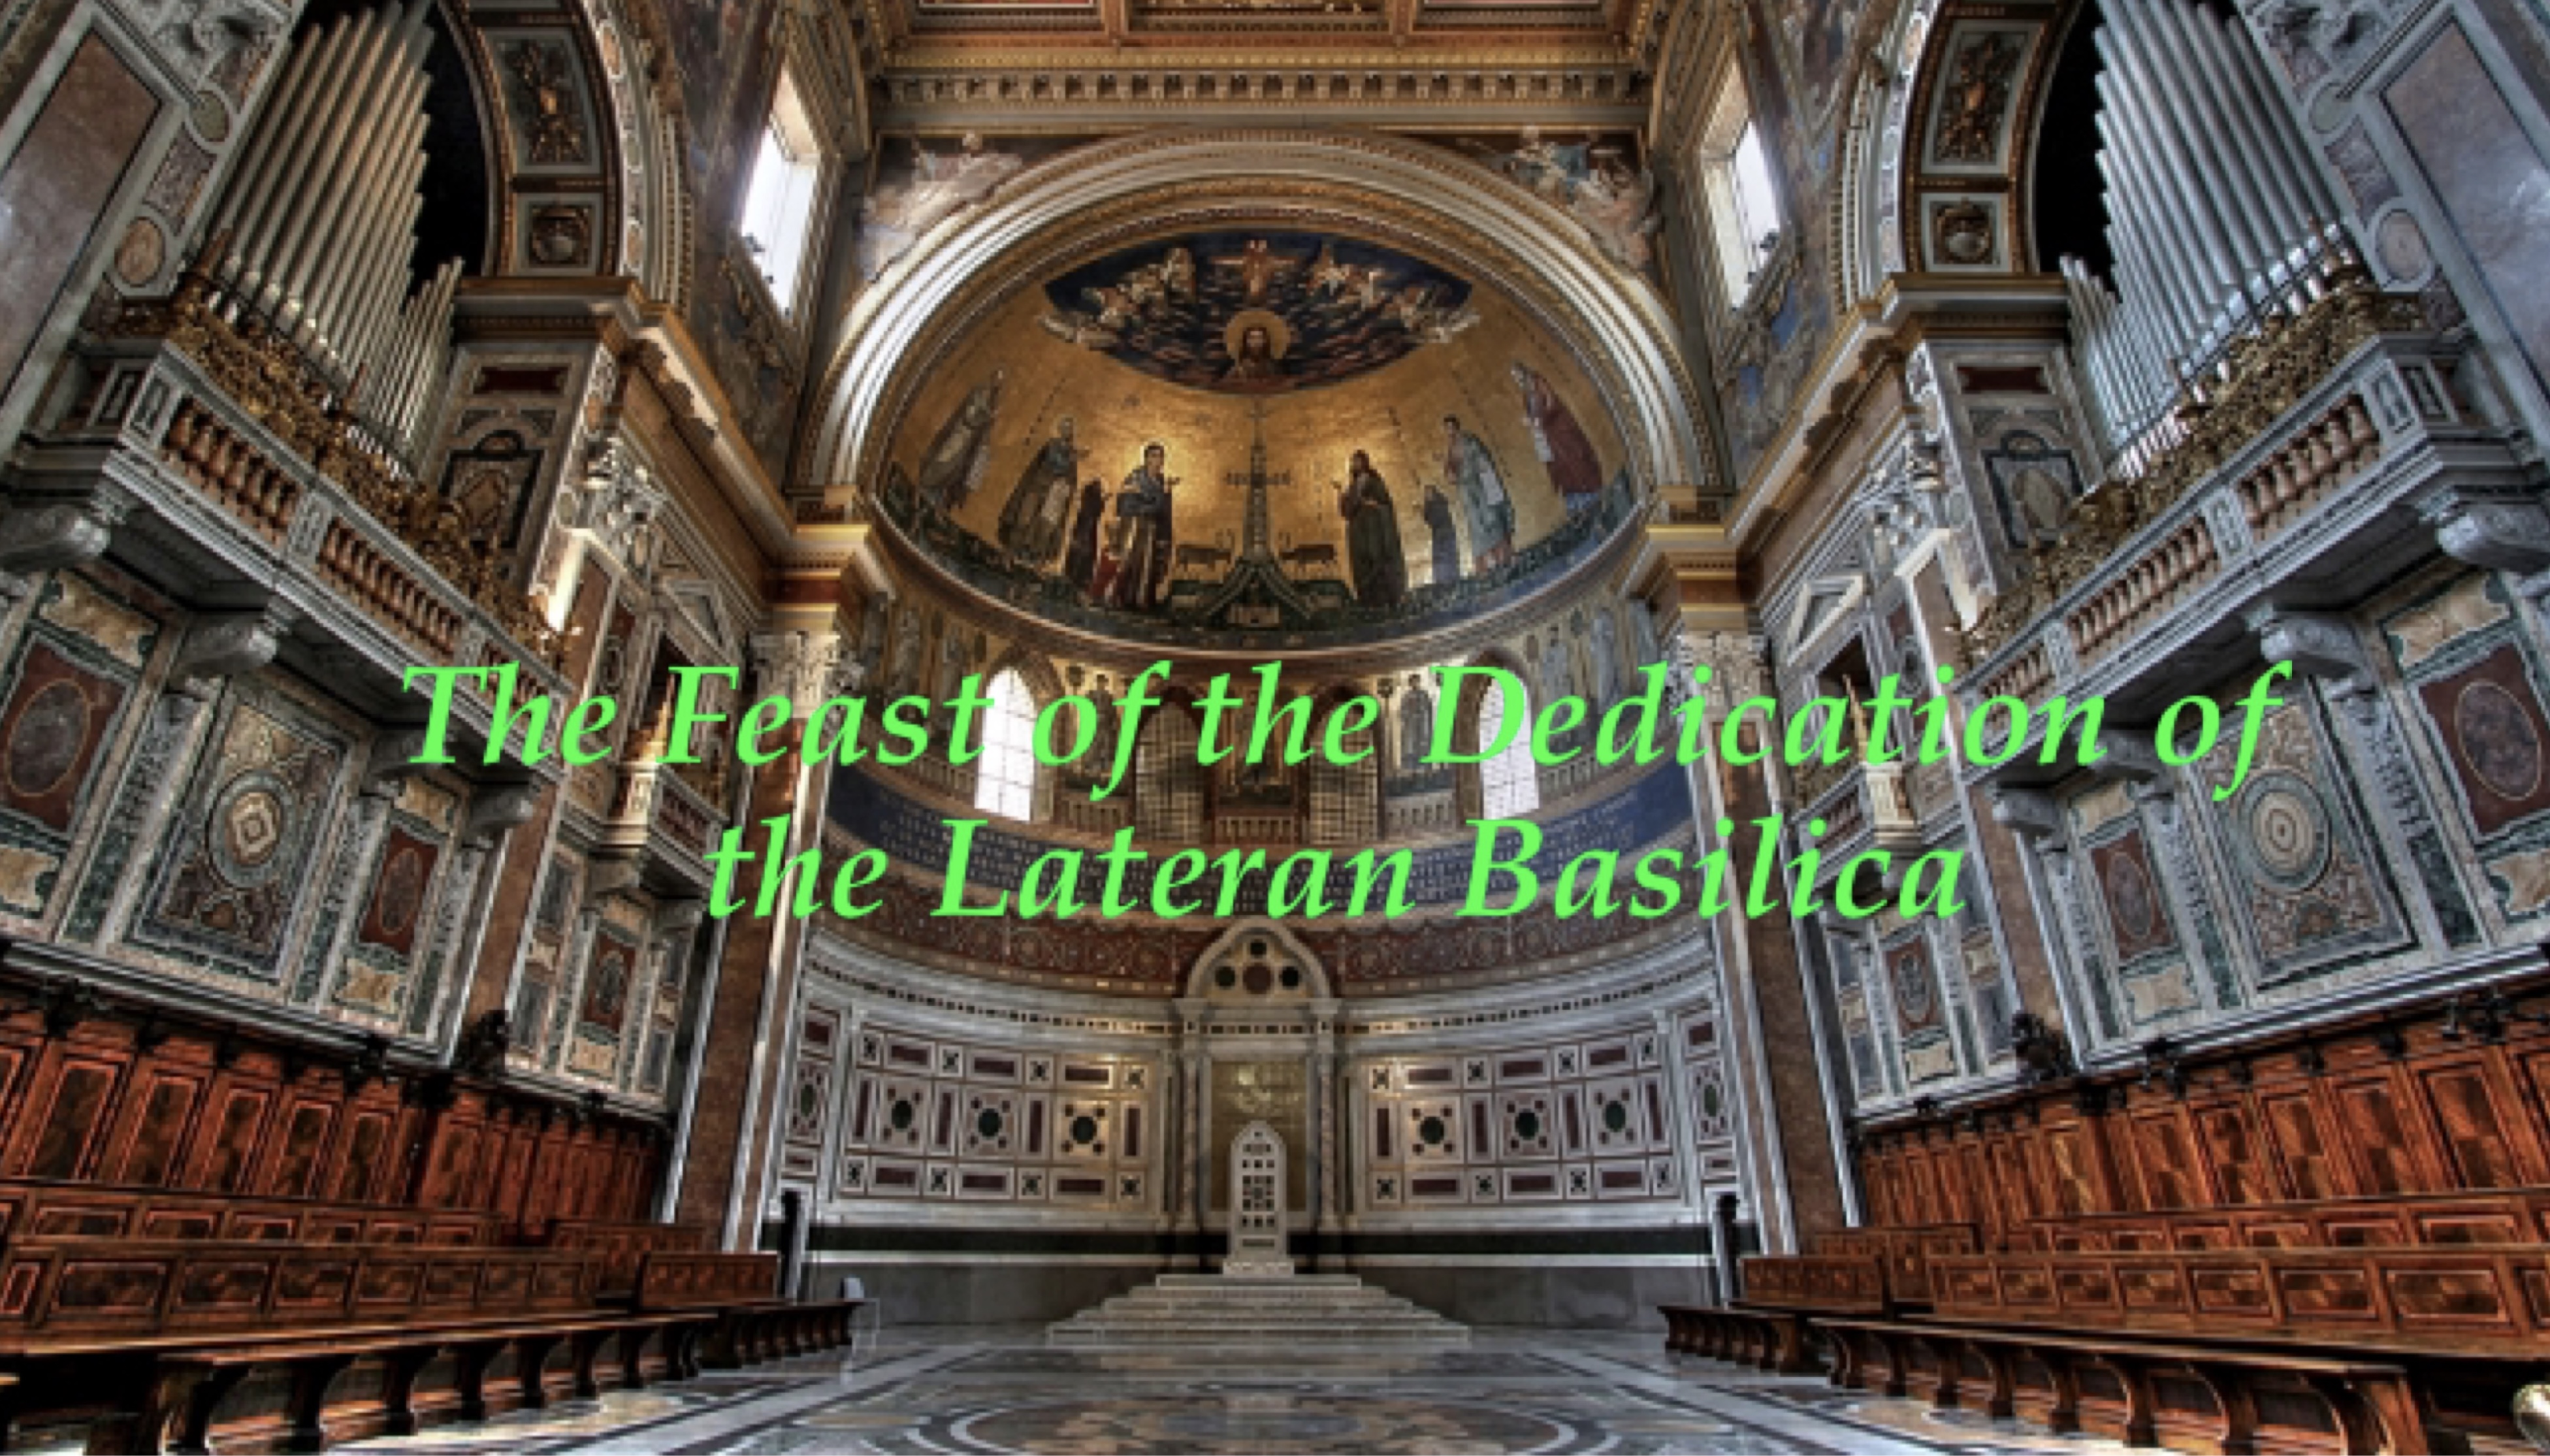 9th November - The Feast of the Dedication of the Lateran Basilica